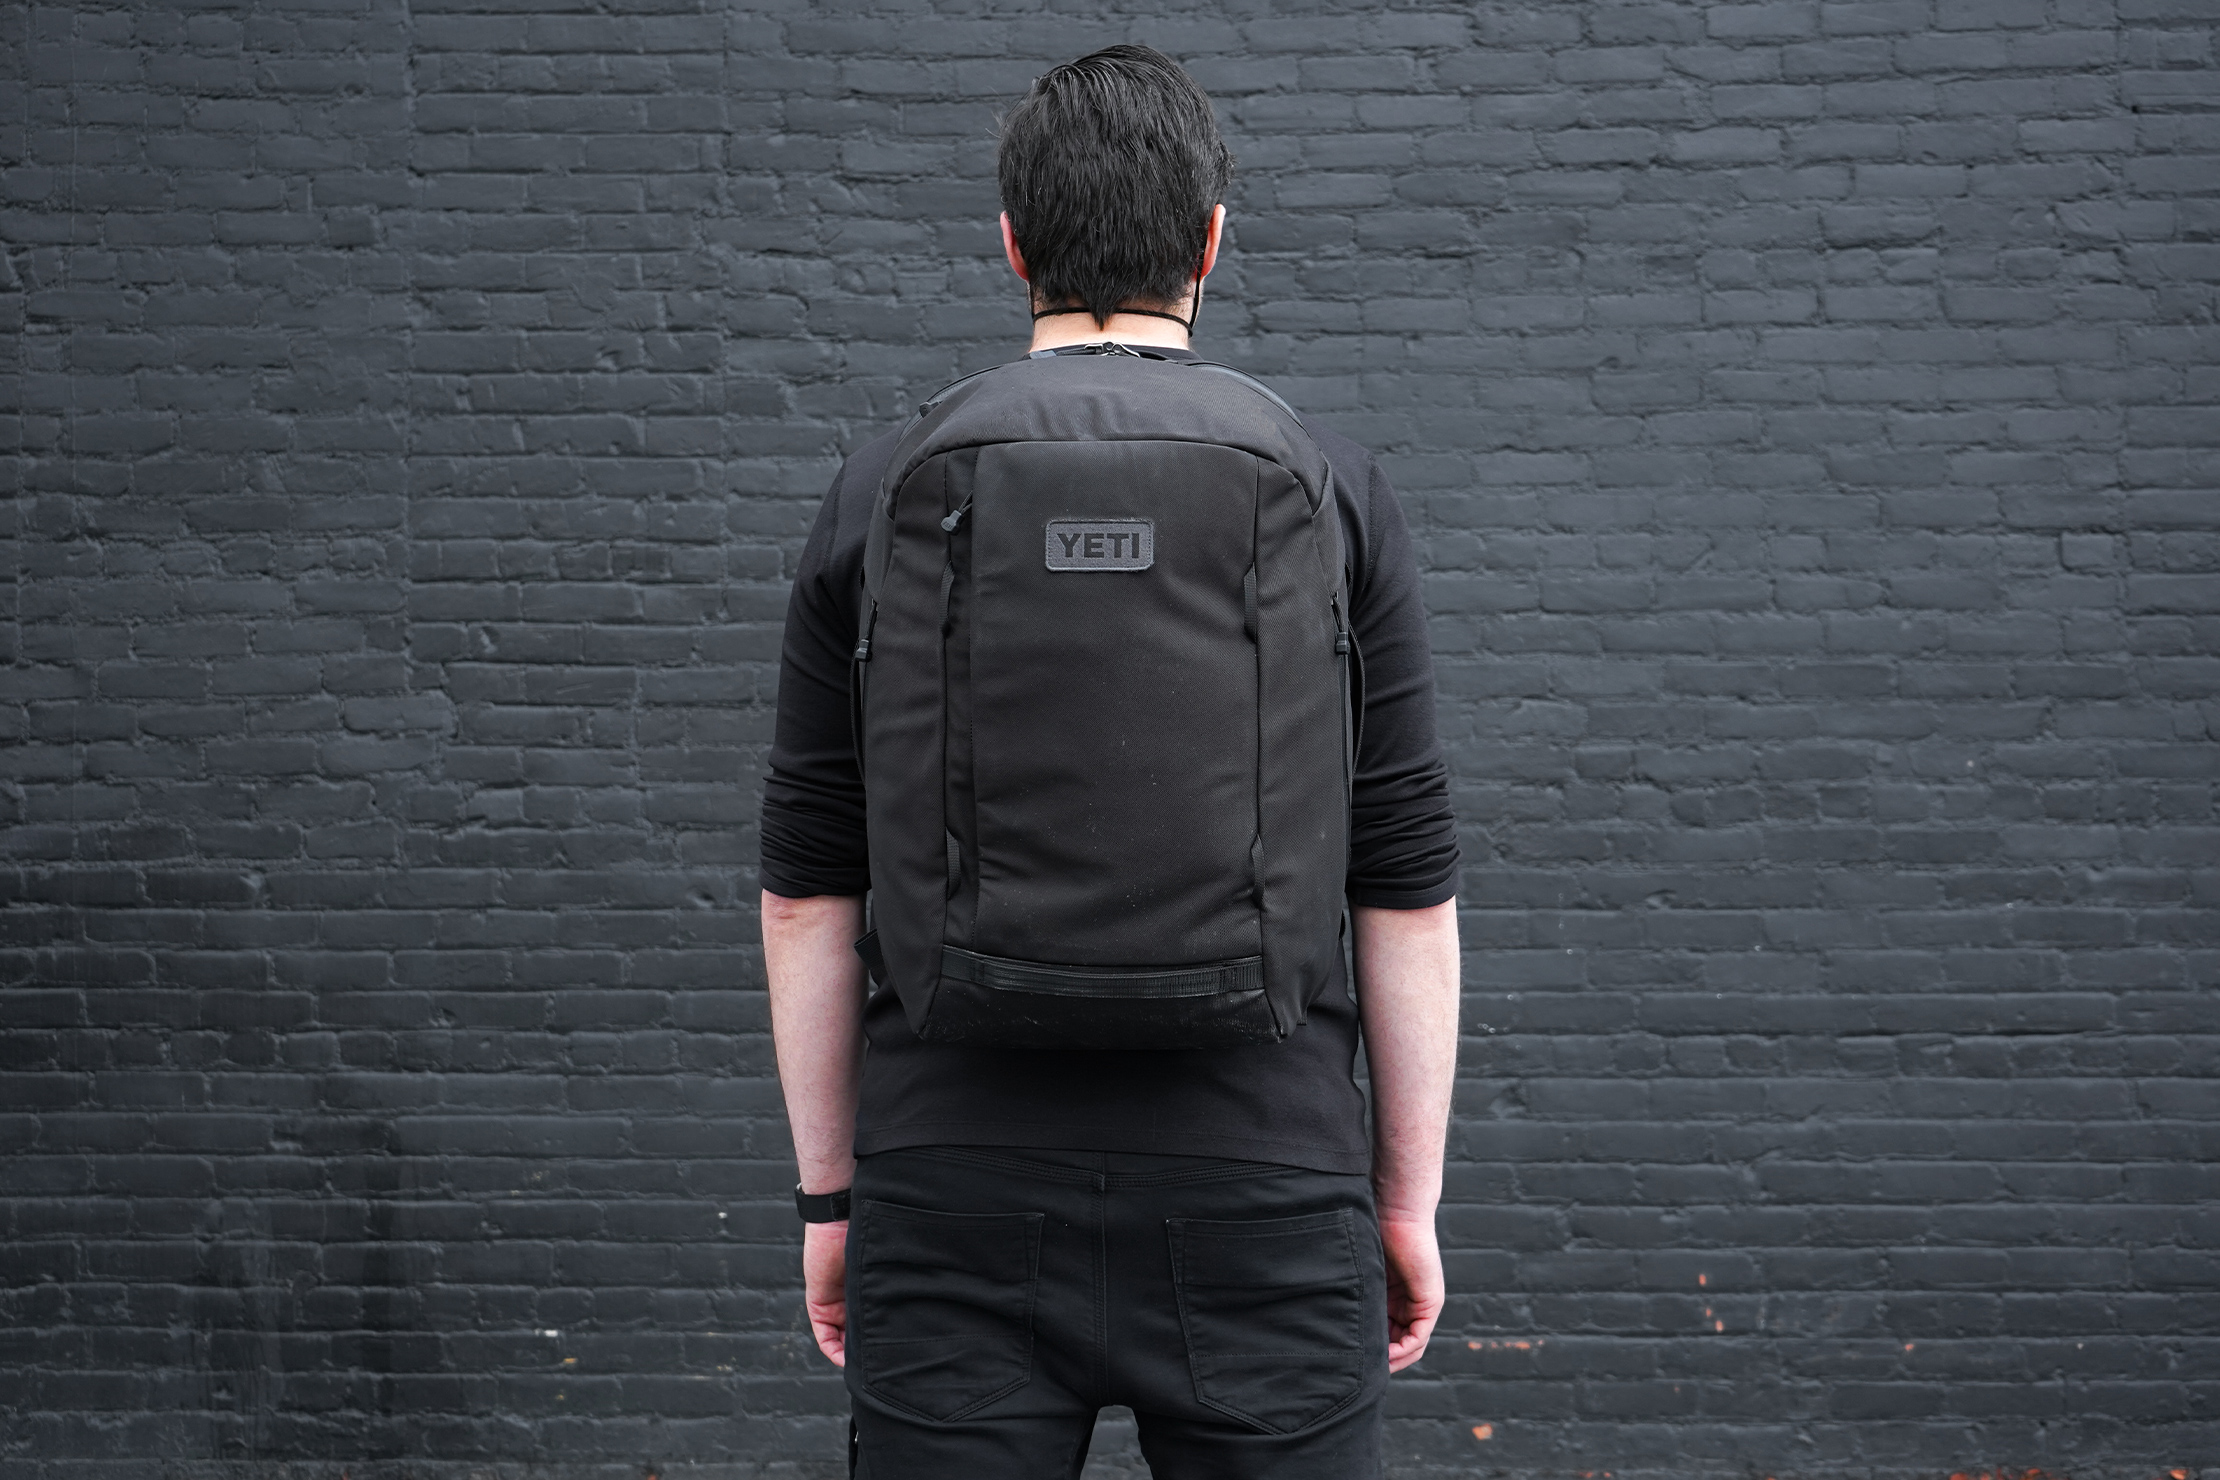 Yeti Crossroads 35L Backpack Review: Pricey But Made to Last